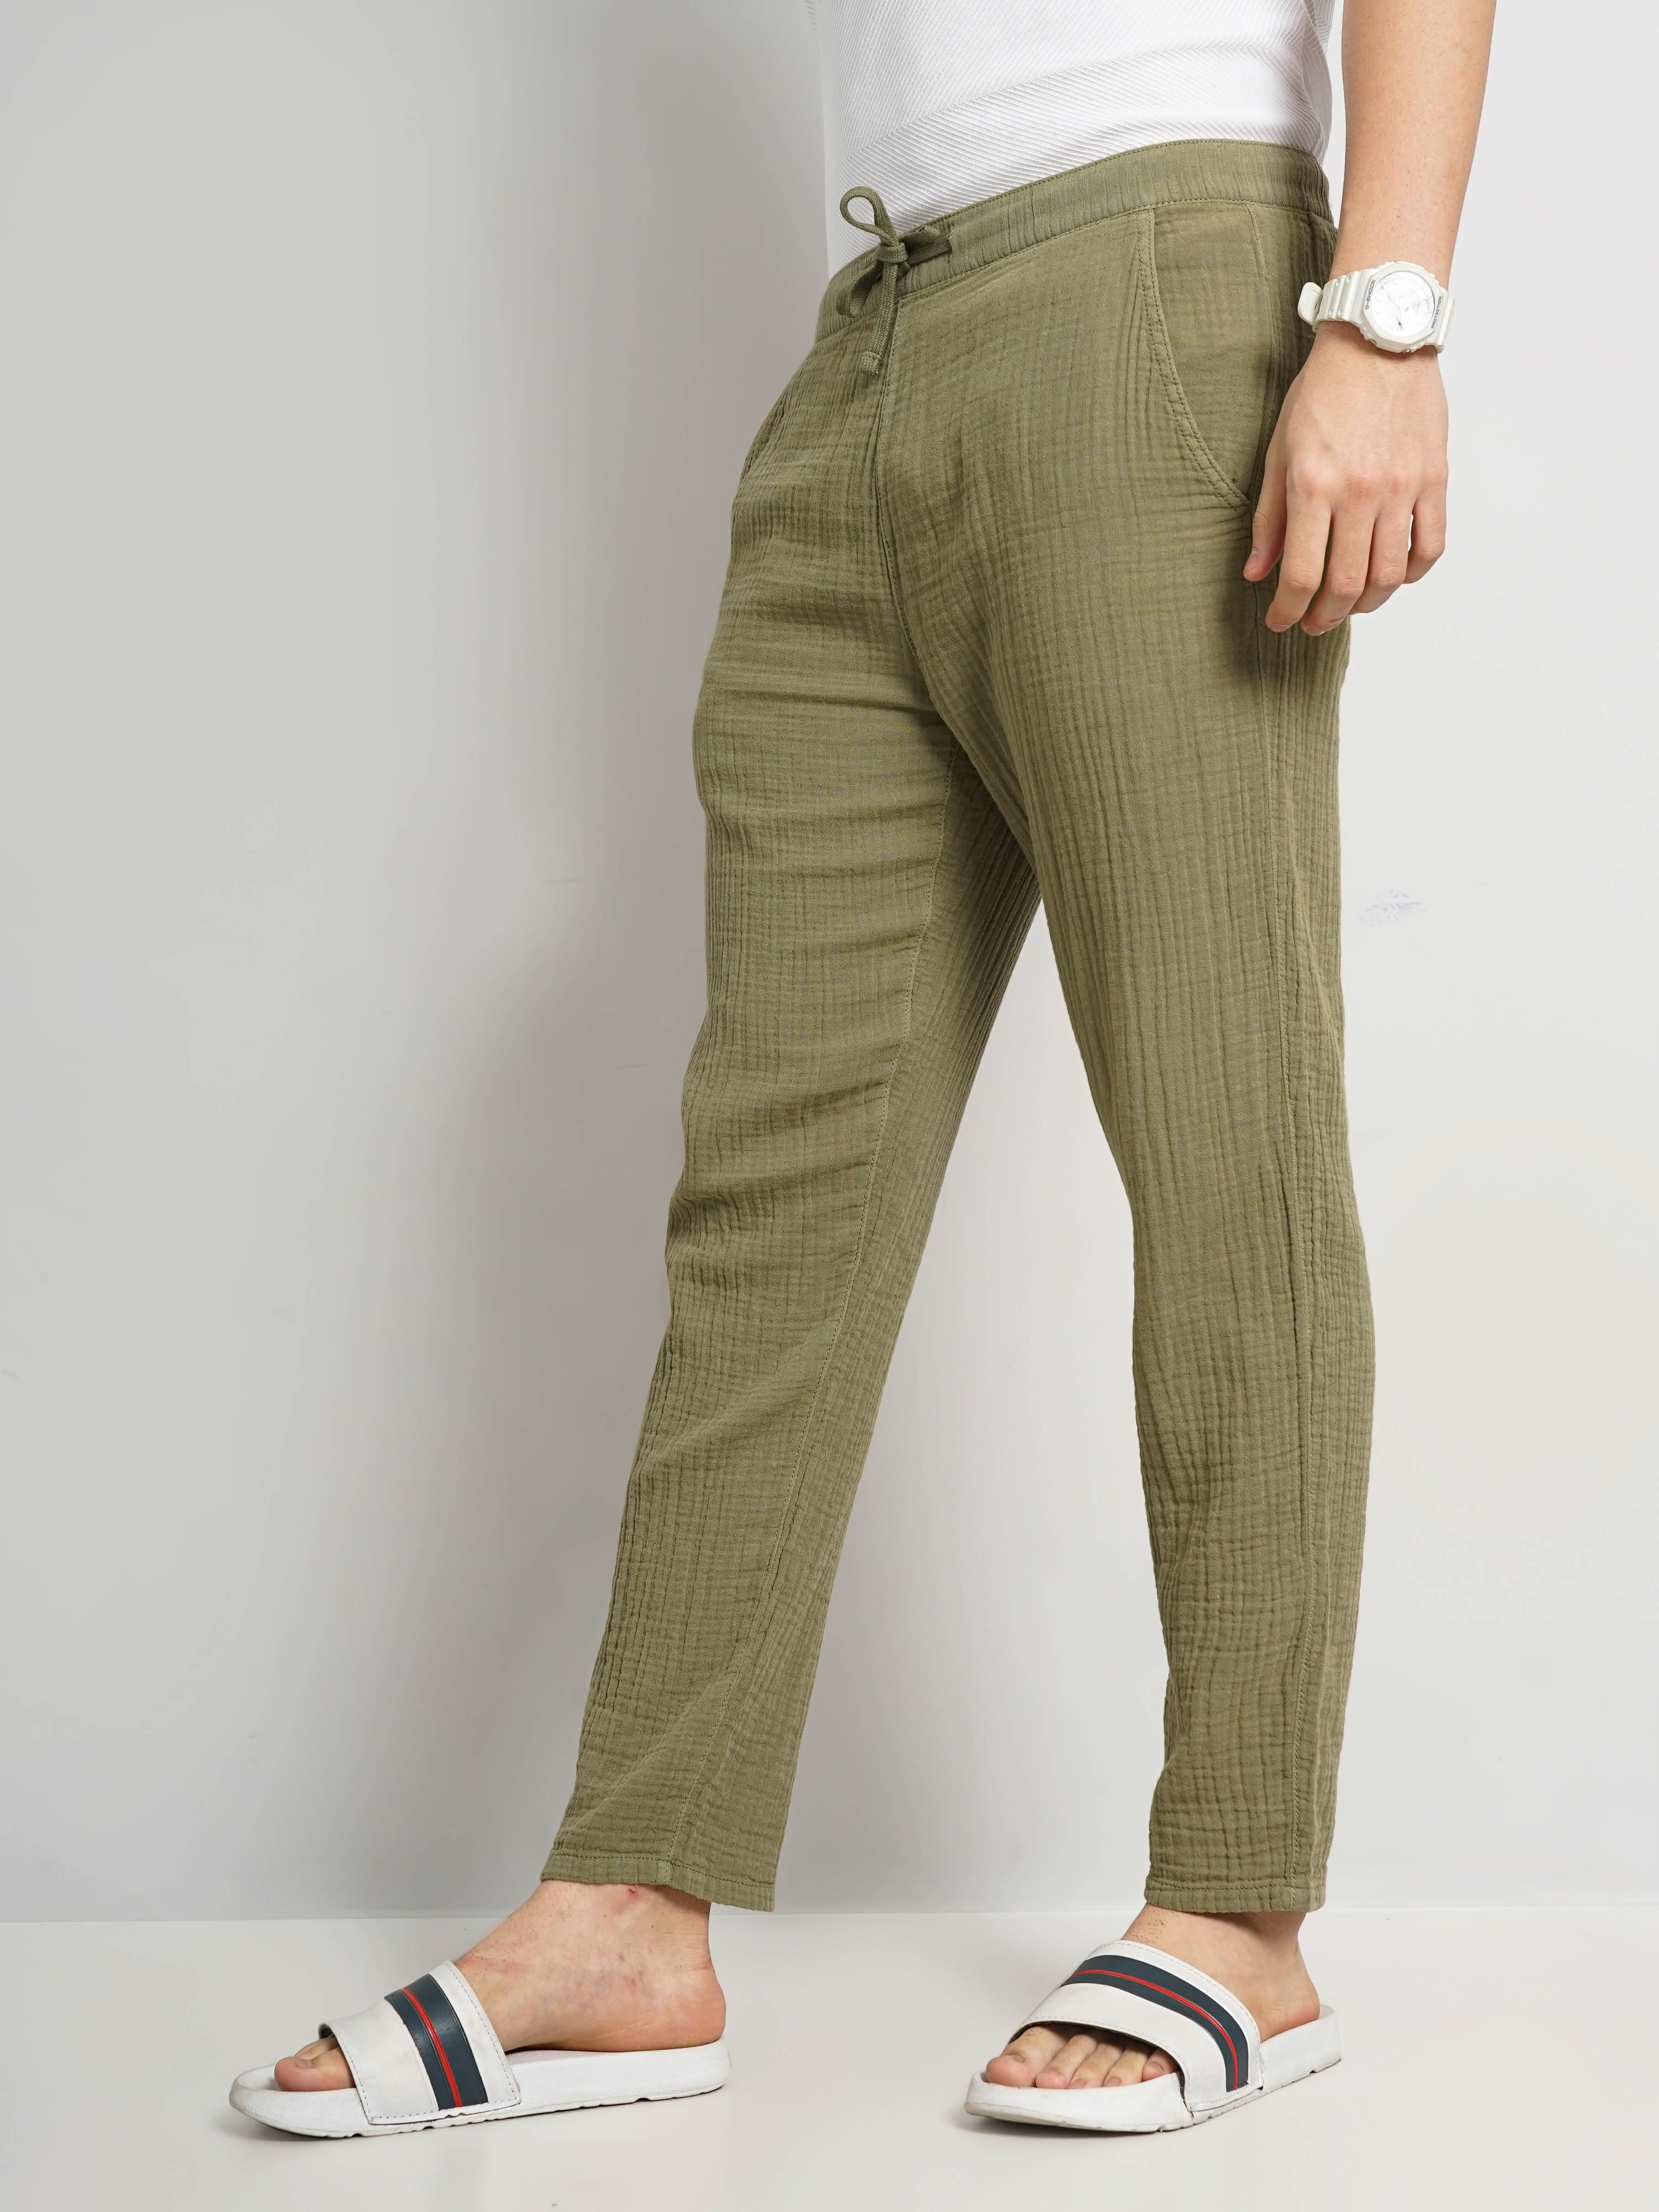 Fall Fashion Mens Office Tartan Trousers Mens Business Casual Pant For  British Social Club Outfits Style #230901 From Kua01, $39.49 | DHgate.Com